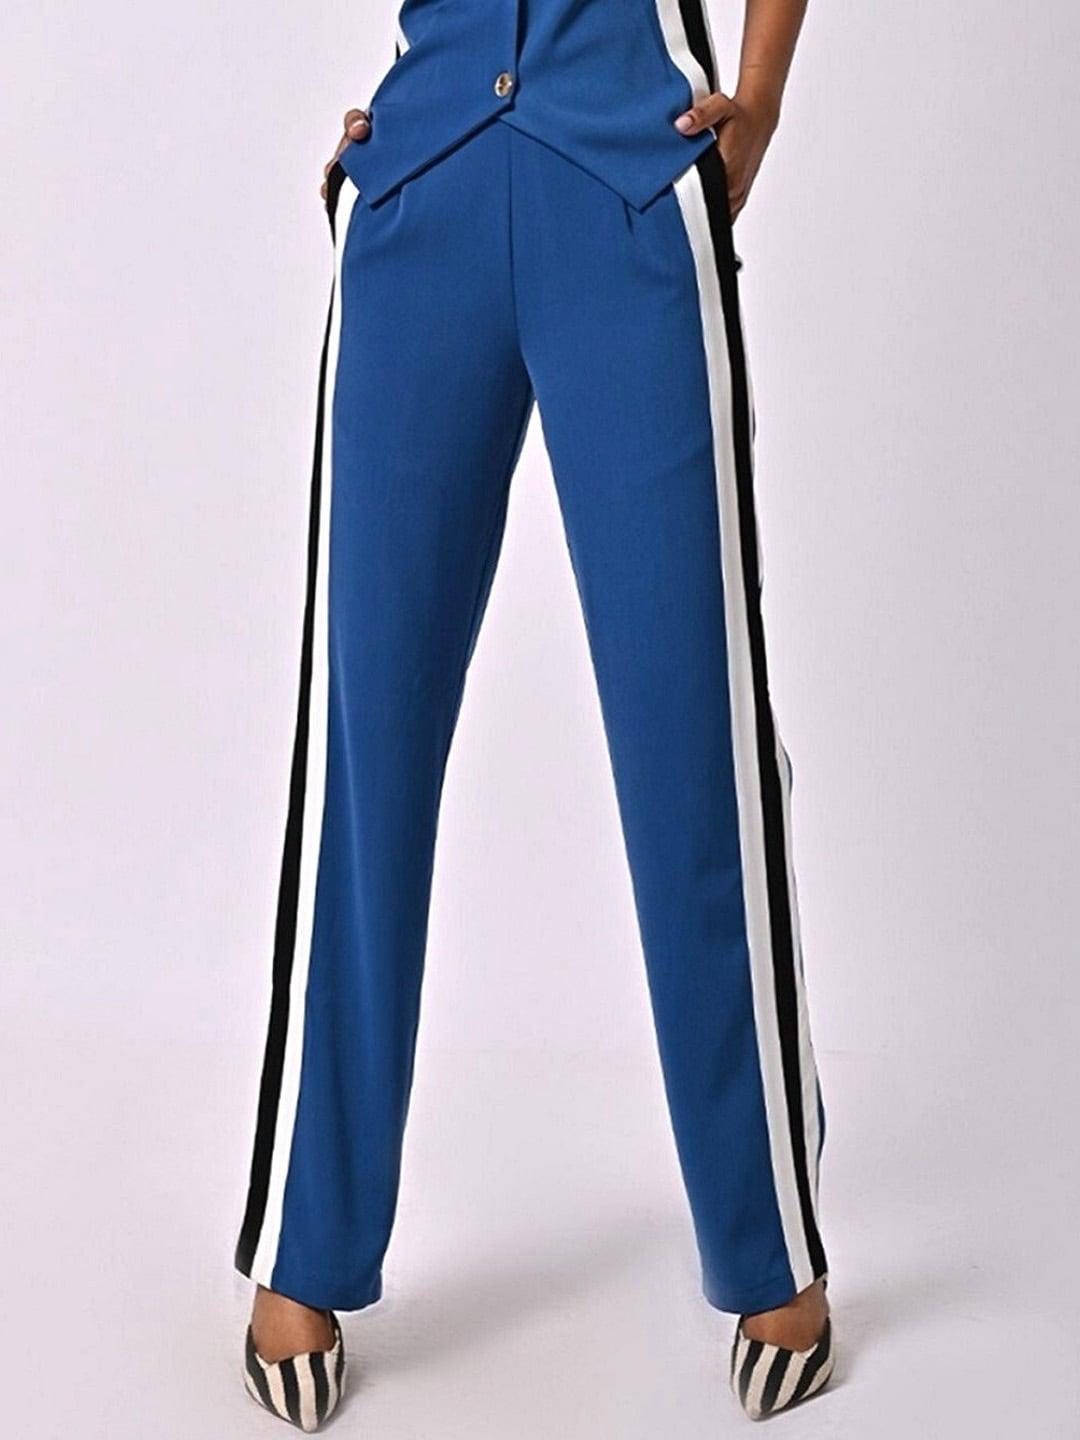 missy-women-striped-comfort-high-rise-parallel-trousers